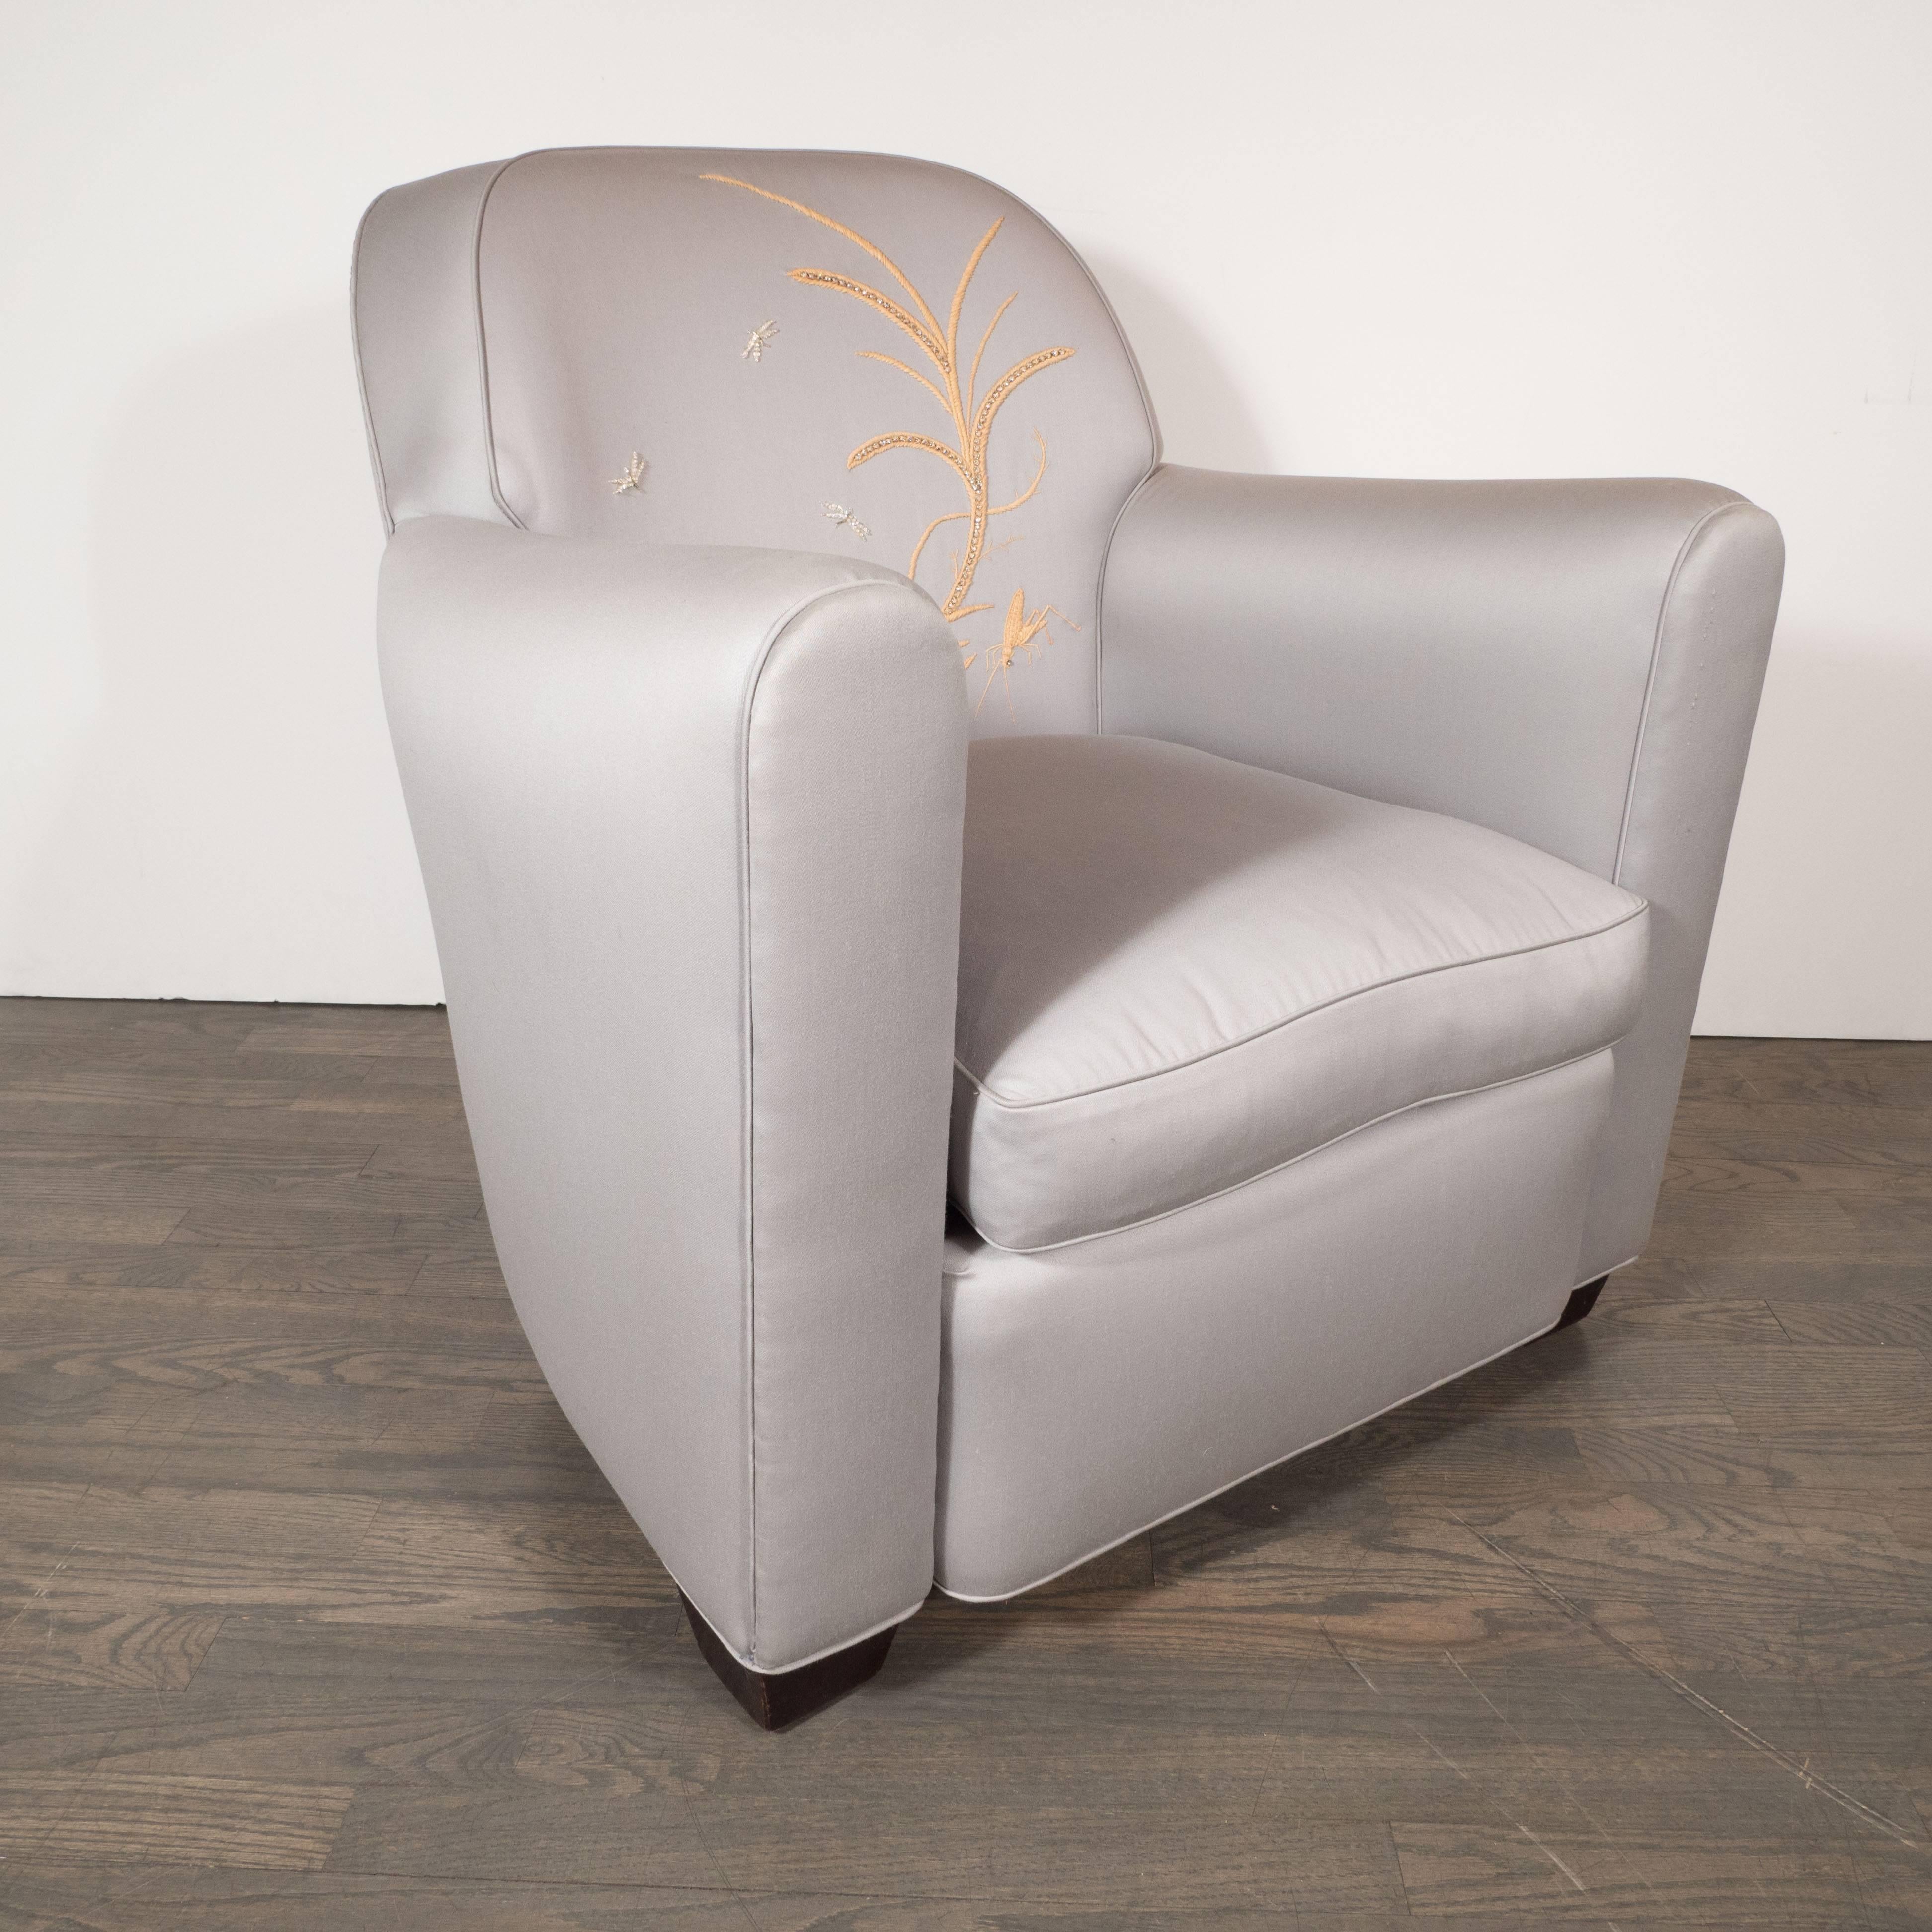 Ebonized Art Deco Armchair with Metallic Silver Upholstery and Embroidered Fauna Motifs